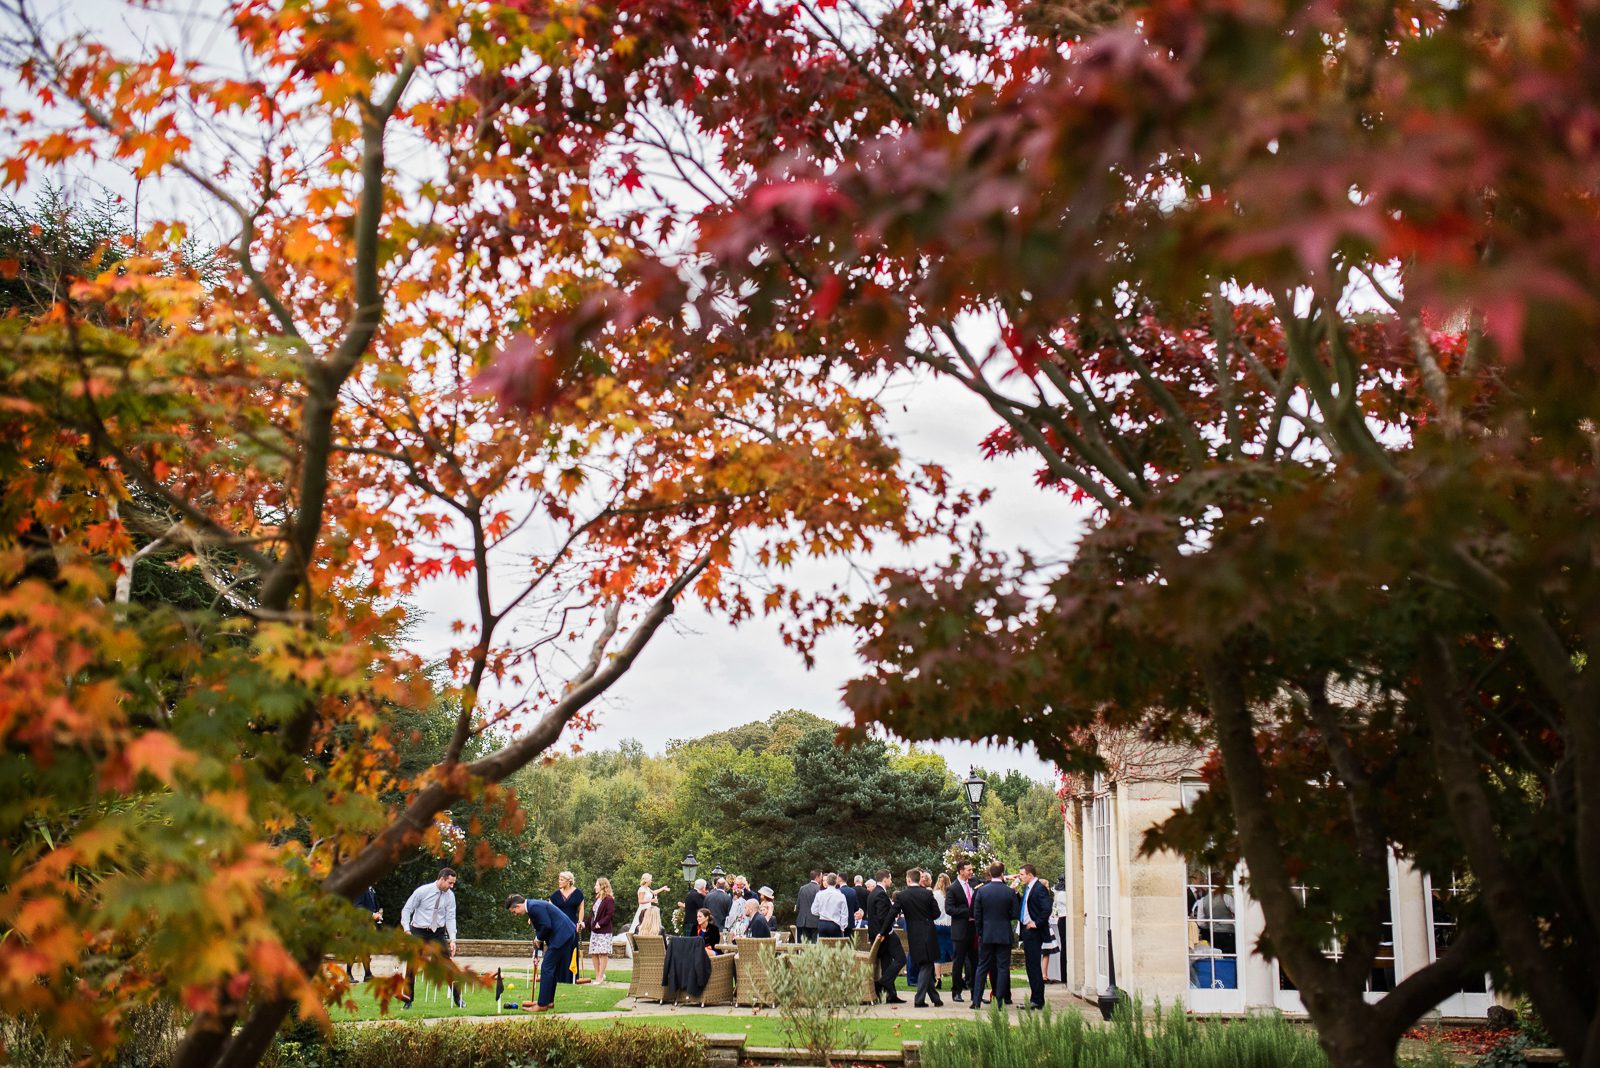 Photos of an Autumn wedding at pennyhill park during the outdoor reception with drinks and canapés on the terrace.